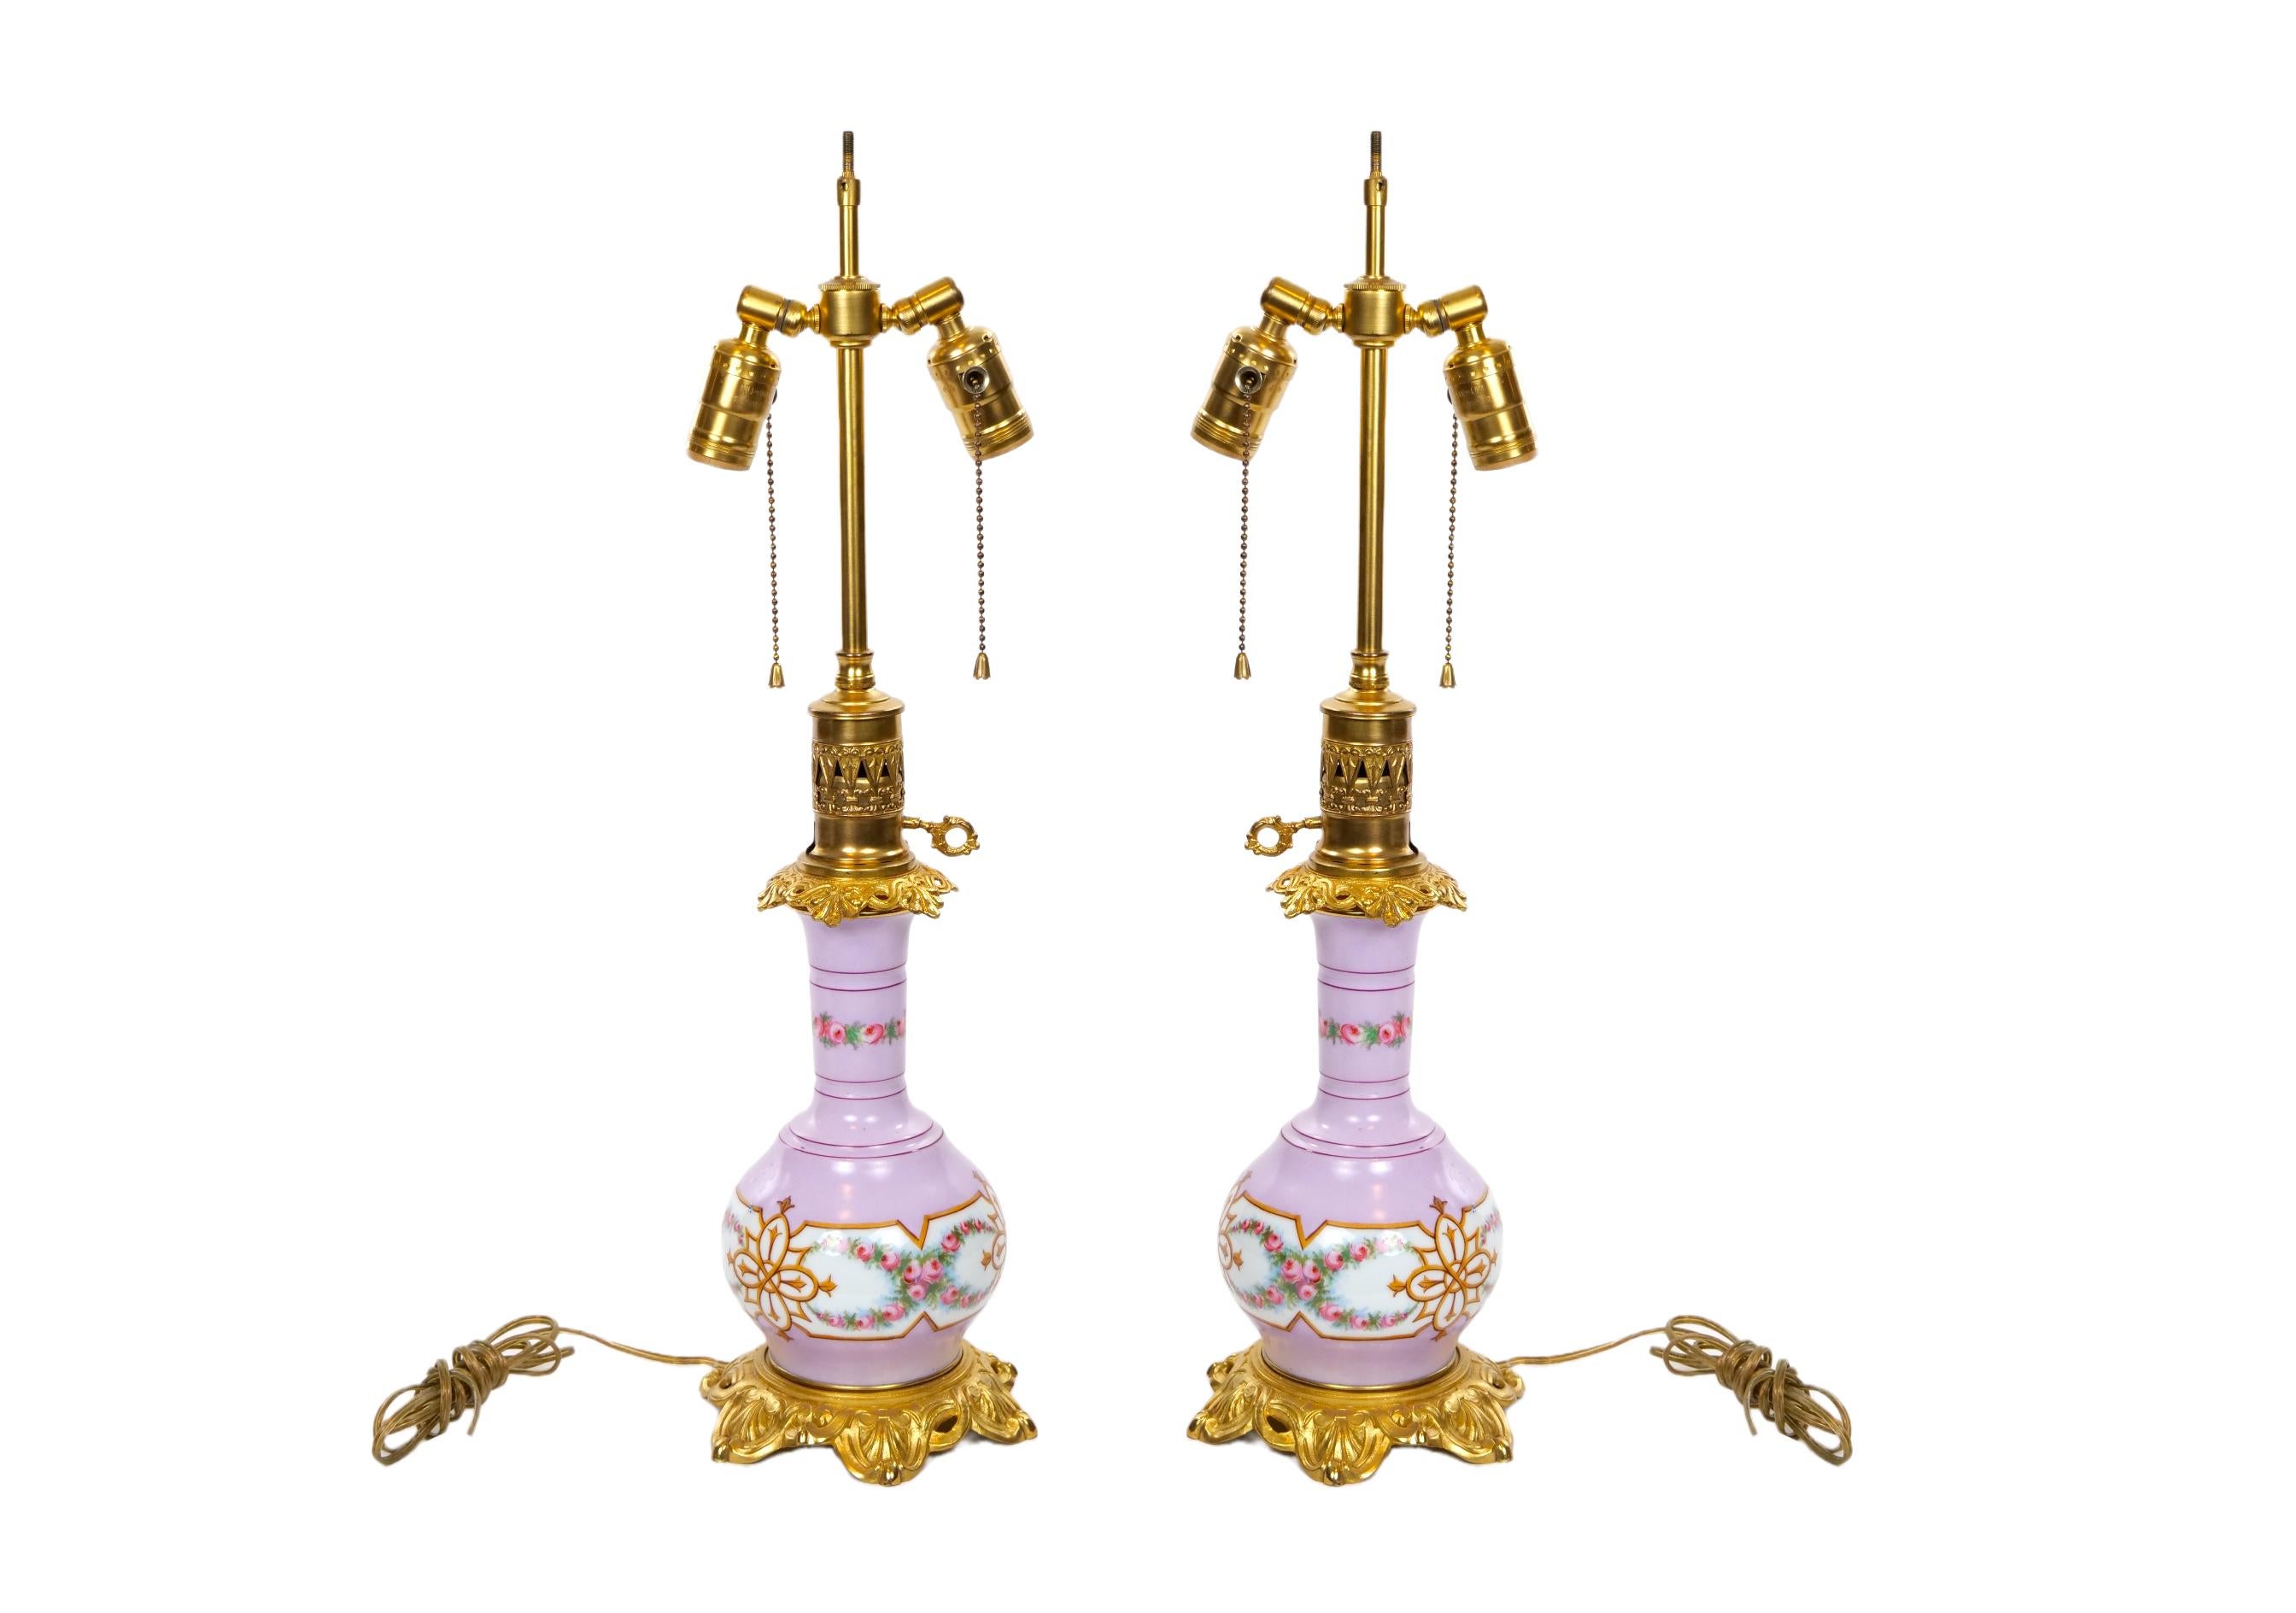 Pair of neoclassical style porcelain with gilt bronze base table lamp. Each lamp features a  baluster shaped, with an ice pink / lavender glazed background resting on a round gilt bronze base with an inner edge of the neck. Each one is in great